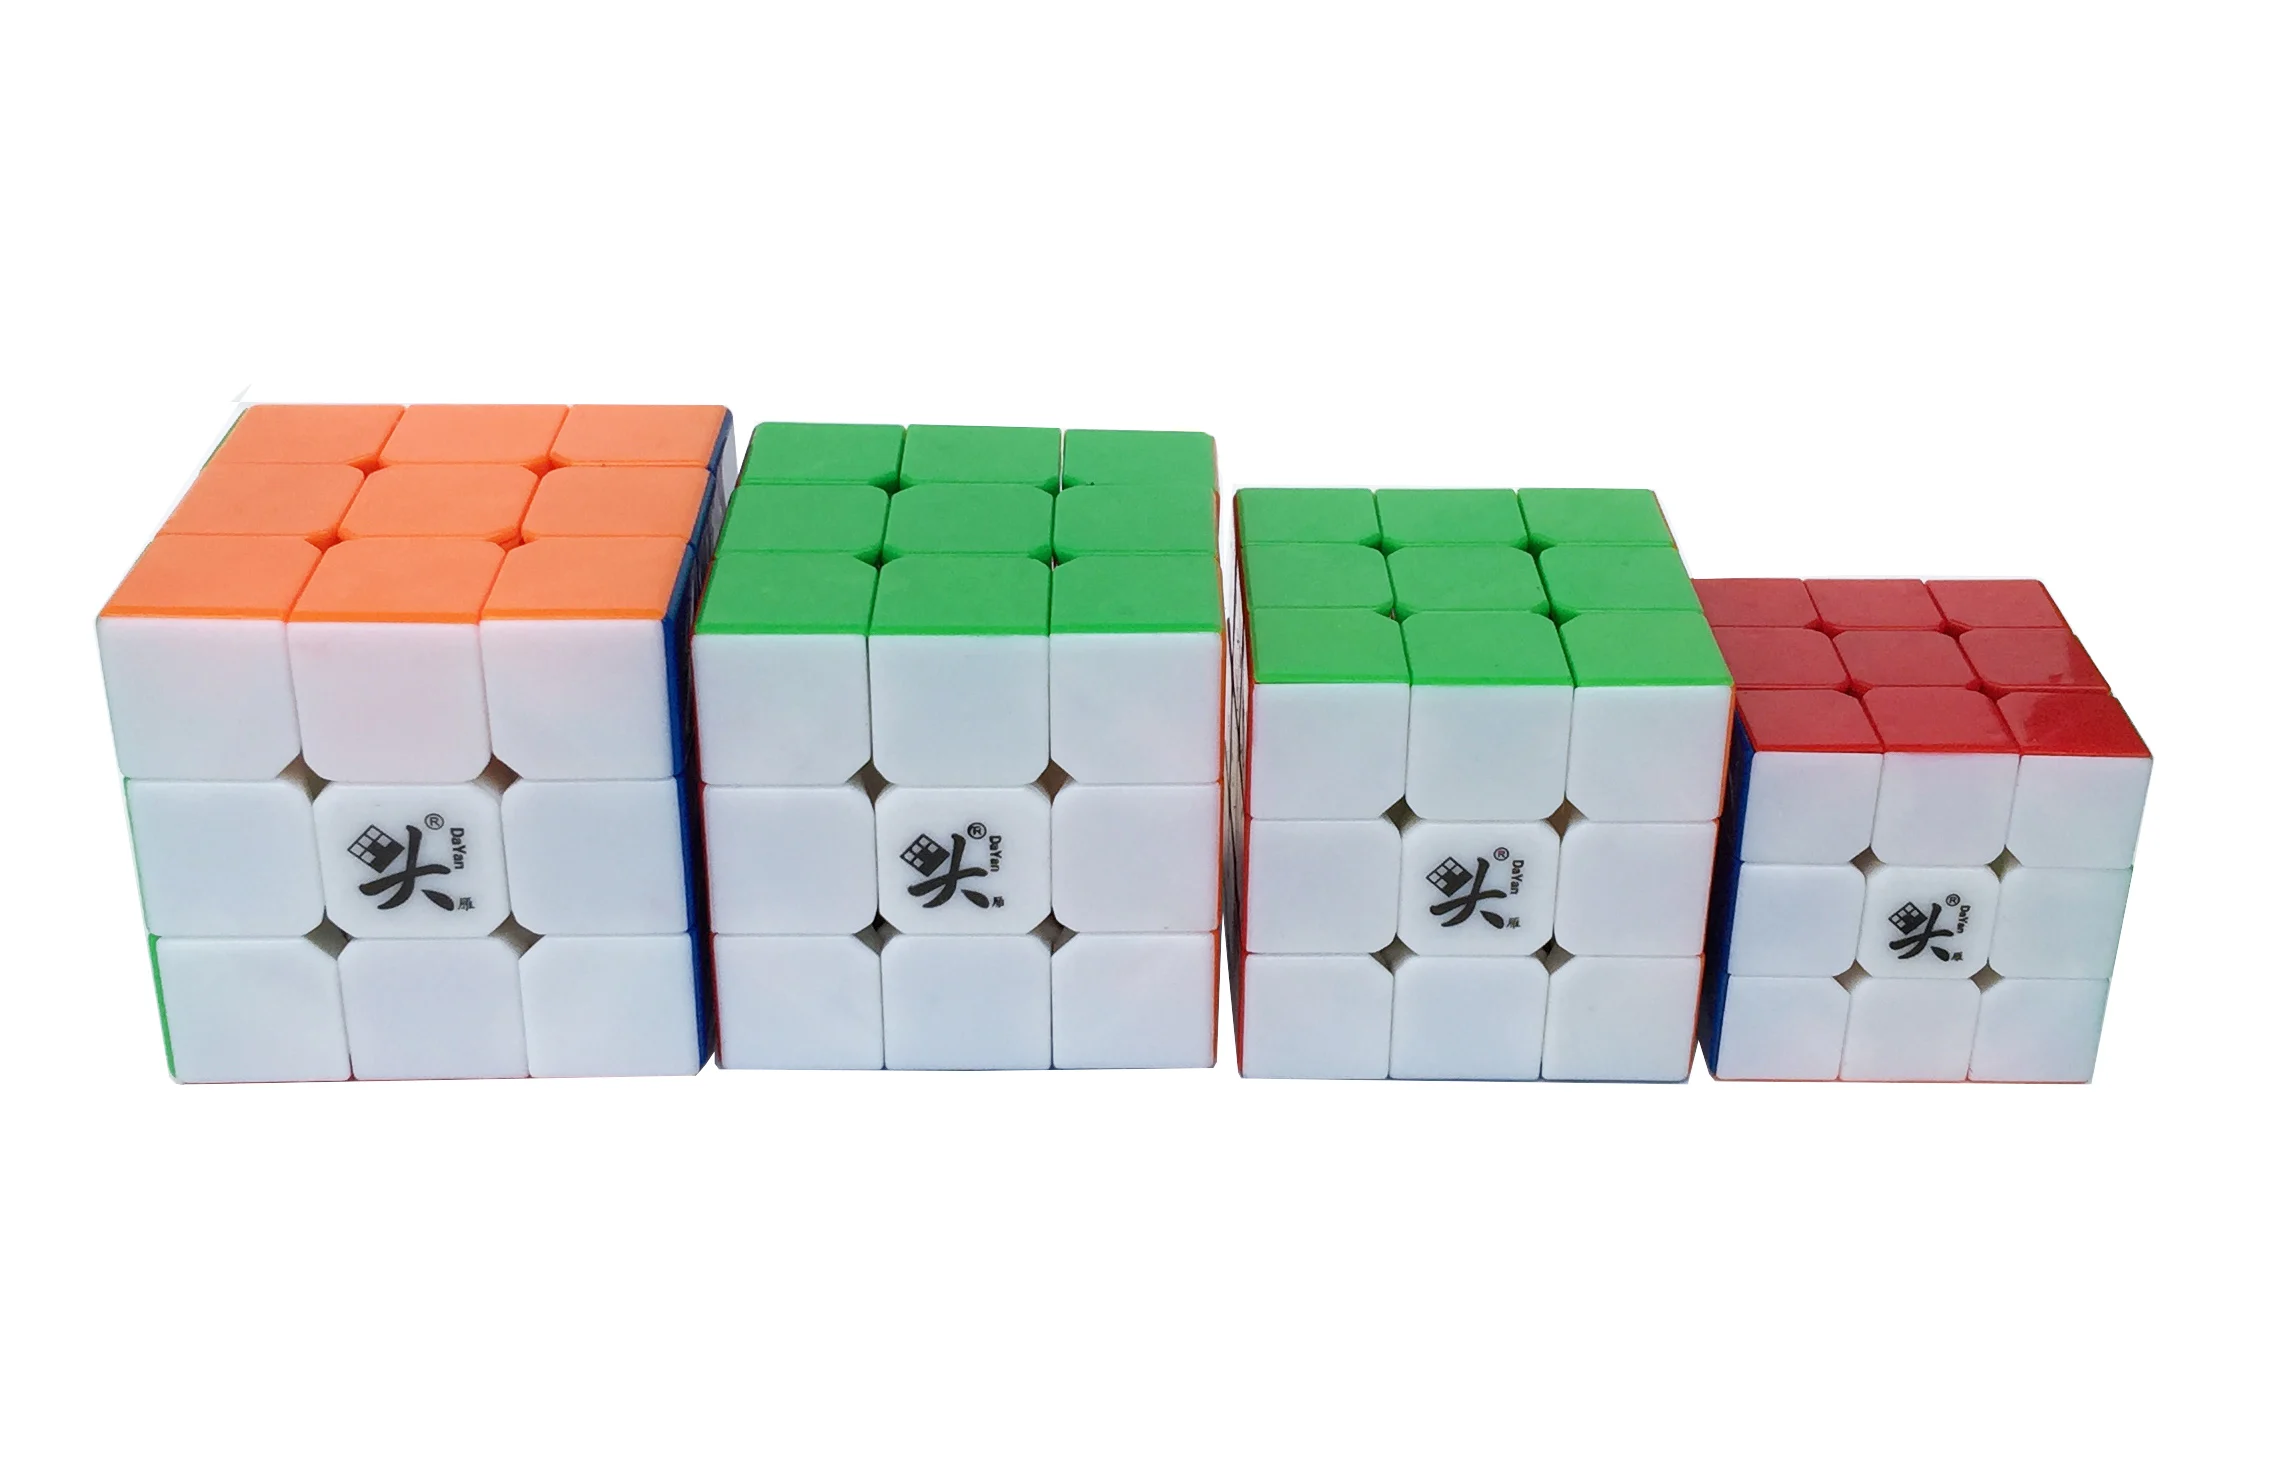 Details about   DaYan ZhanChi 55mm 3x3 Magic Cube Puzzle Cube Educational Toy for Children Kids 